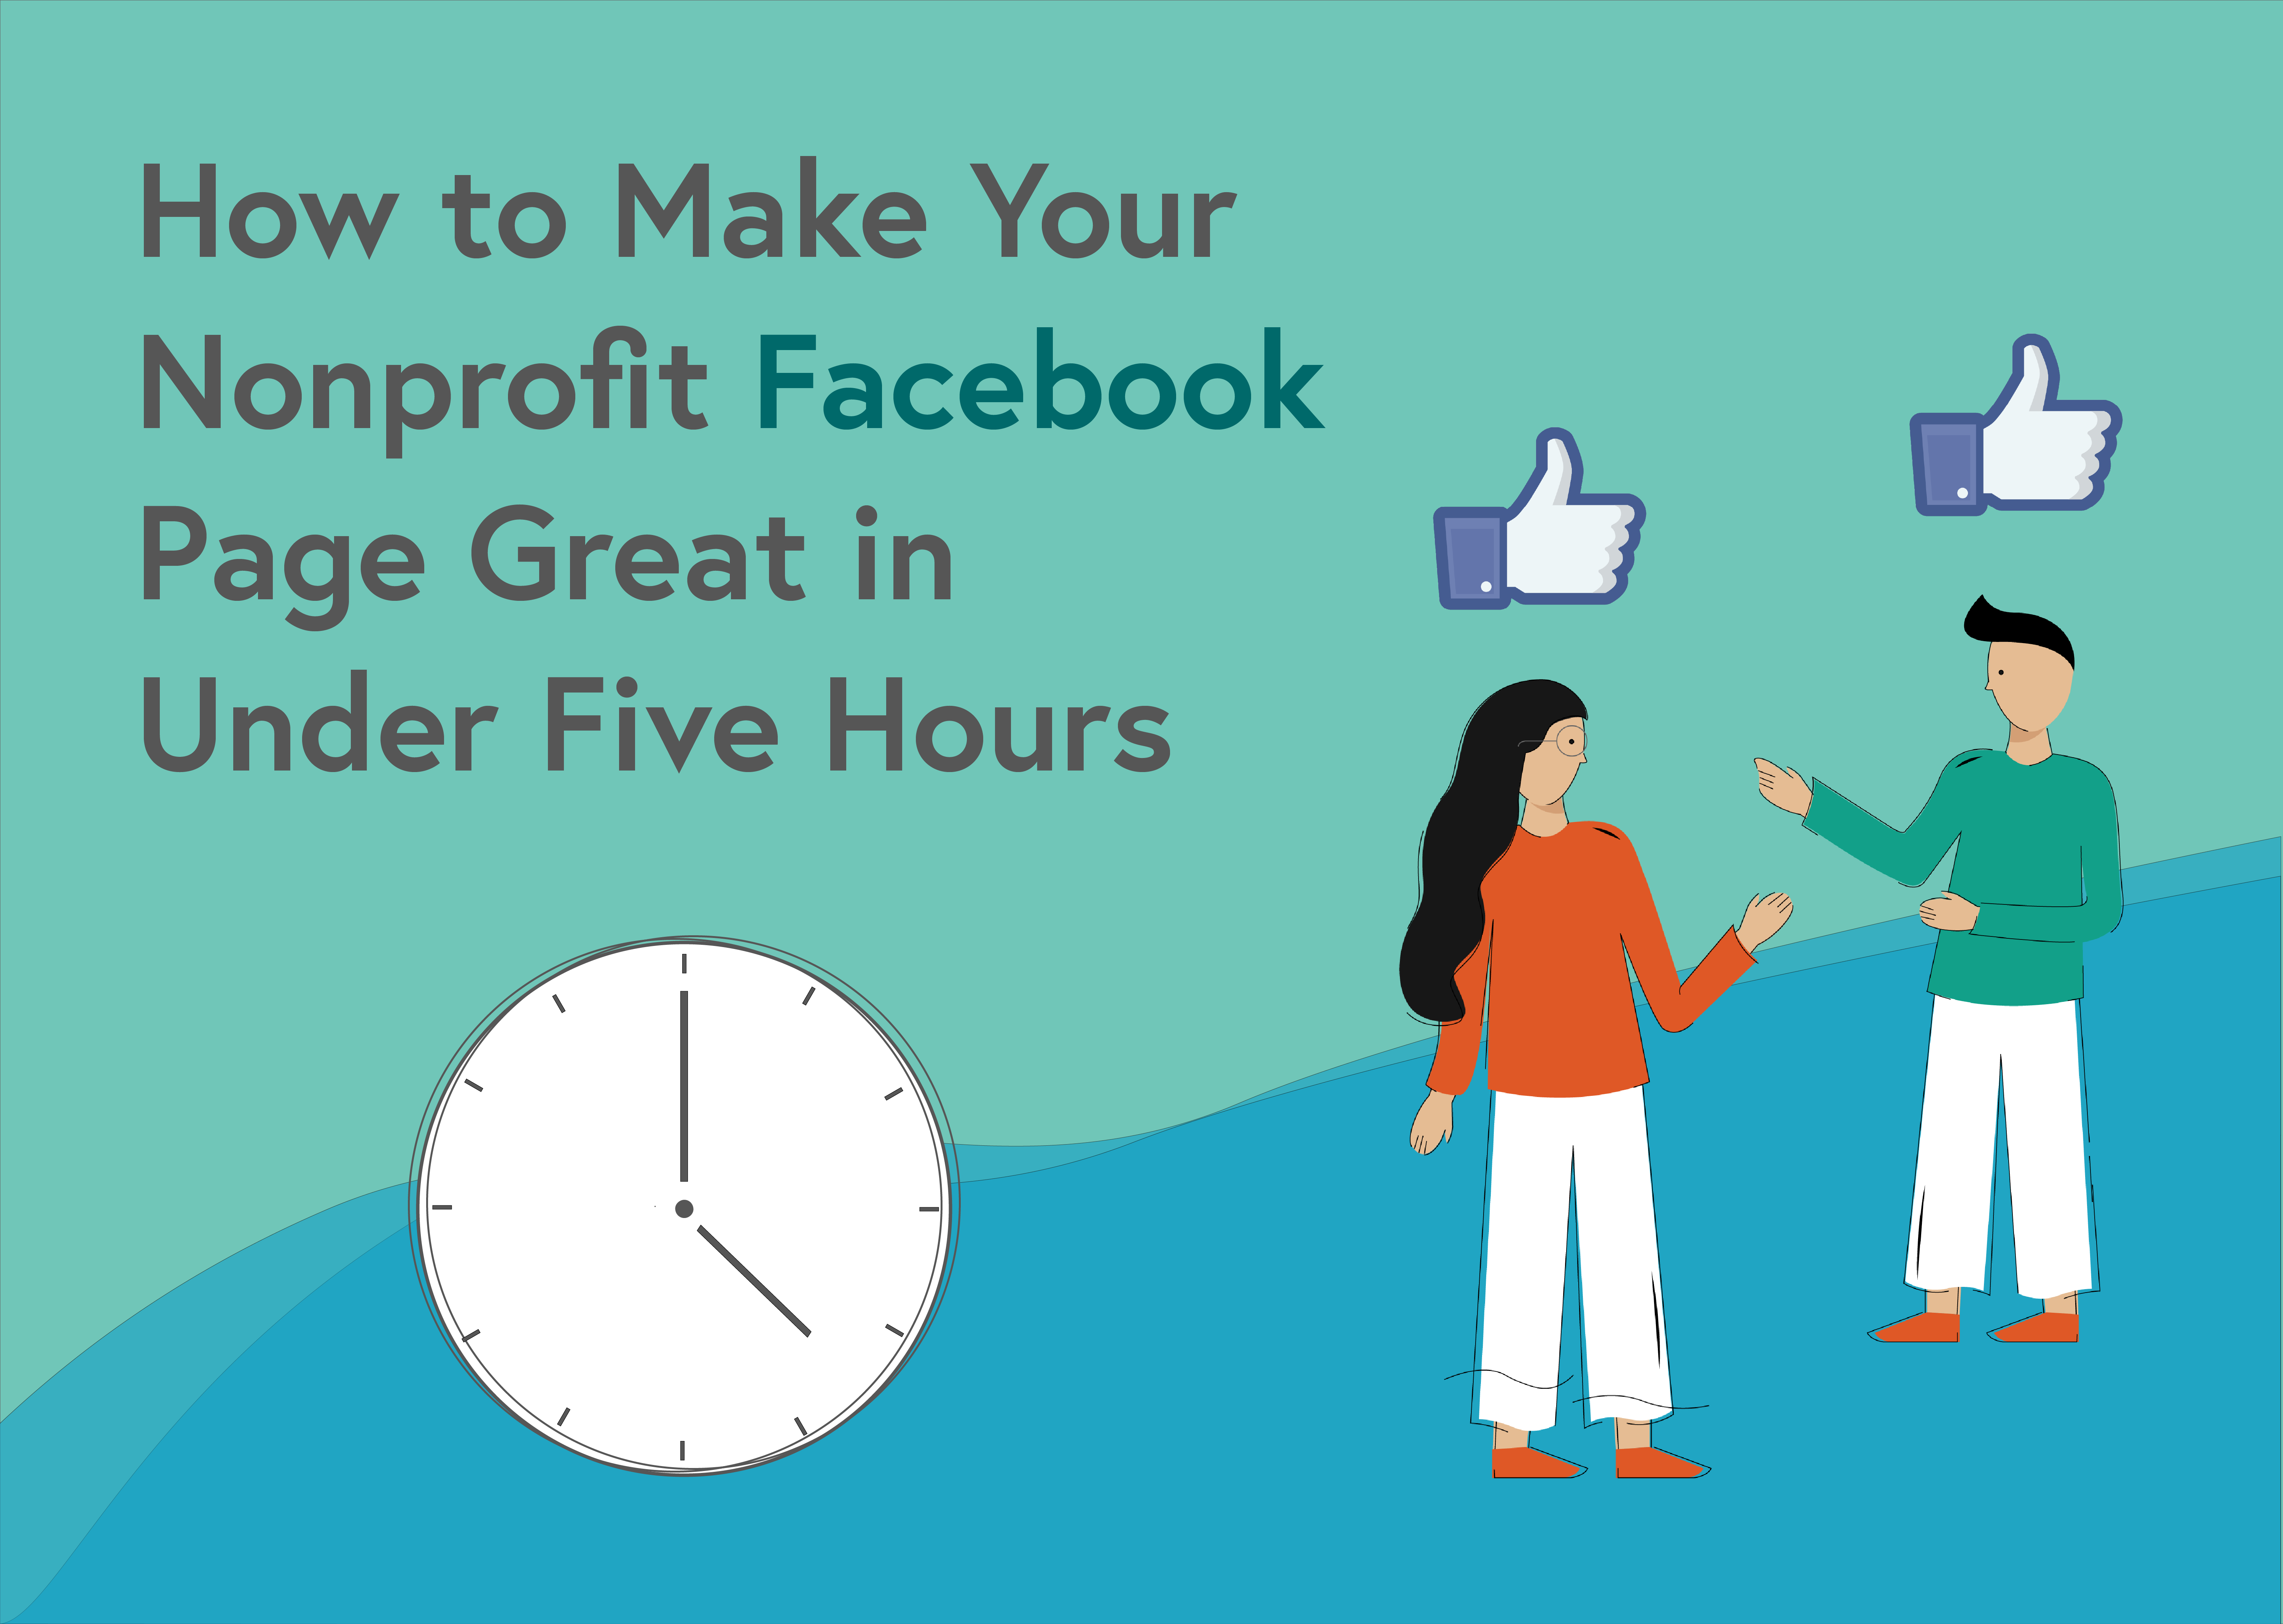 How to Make Your Nonprofit Facebook Page Great in Under Five Hours